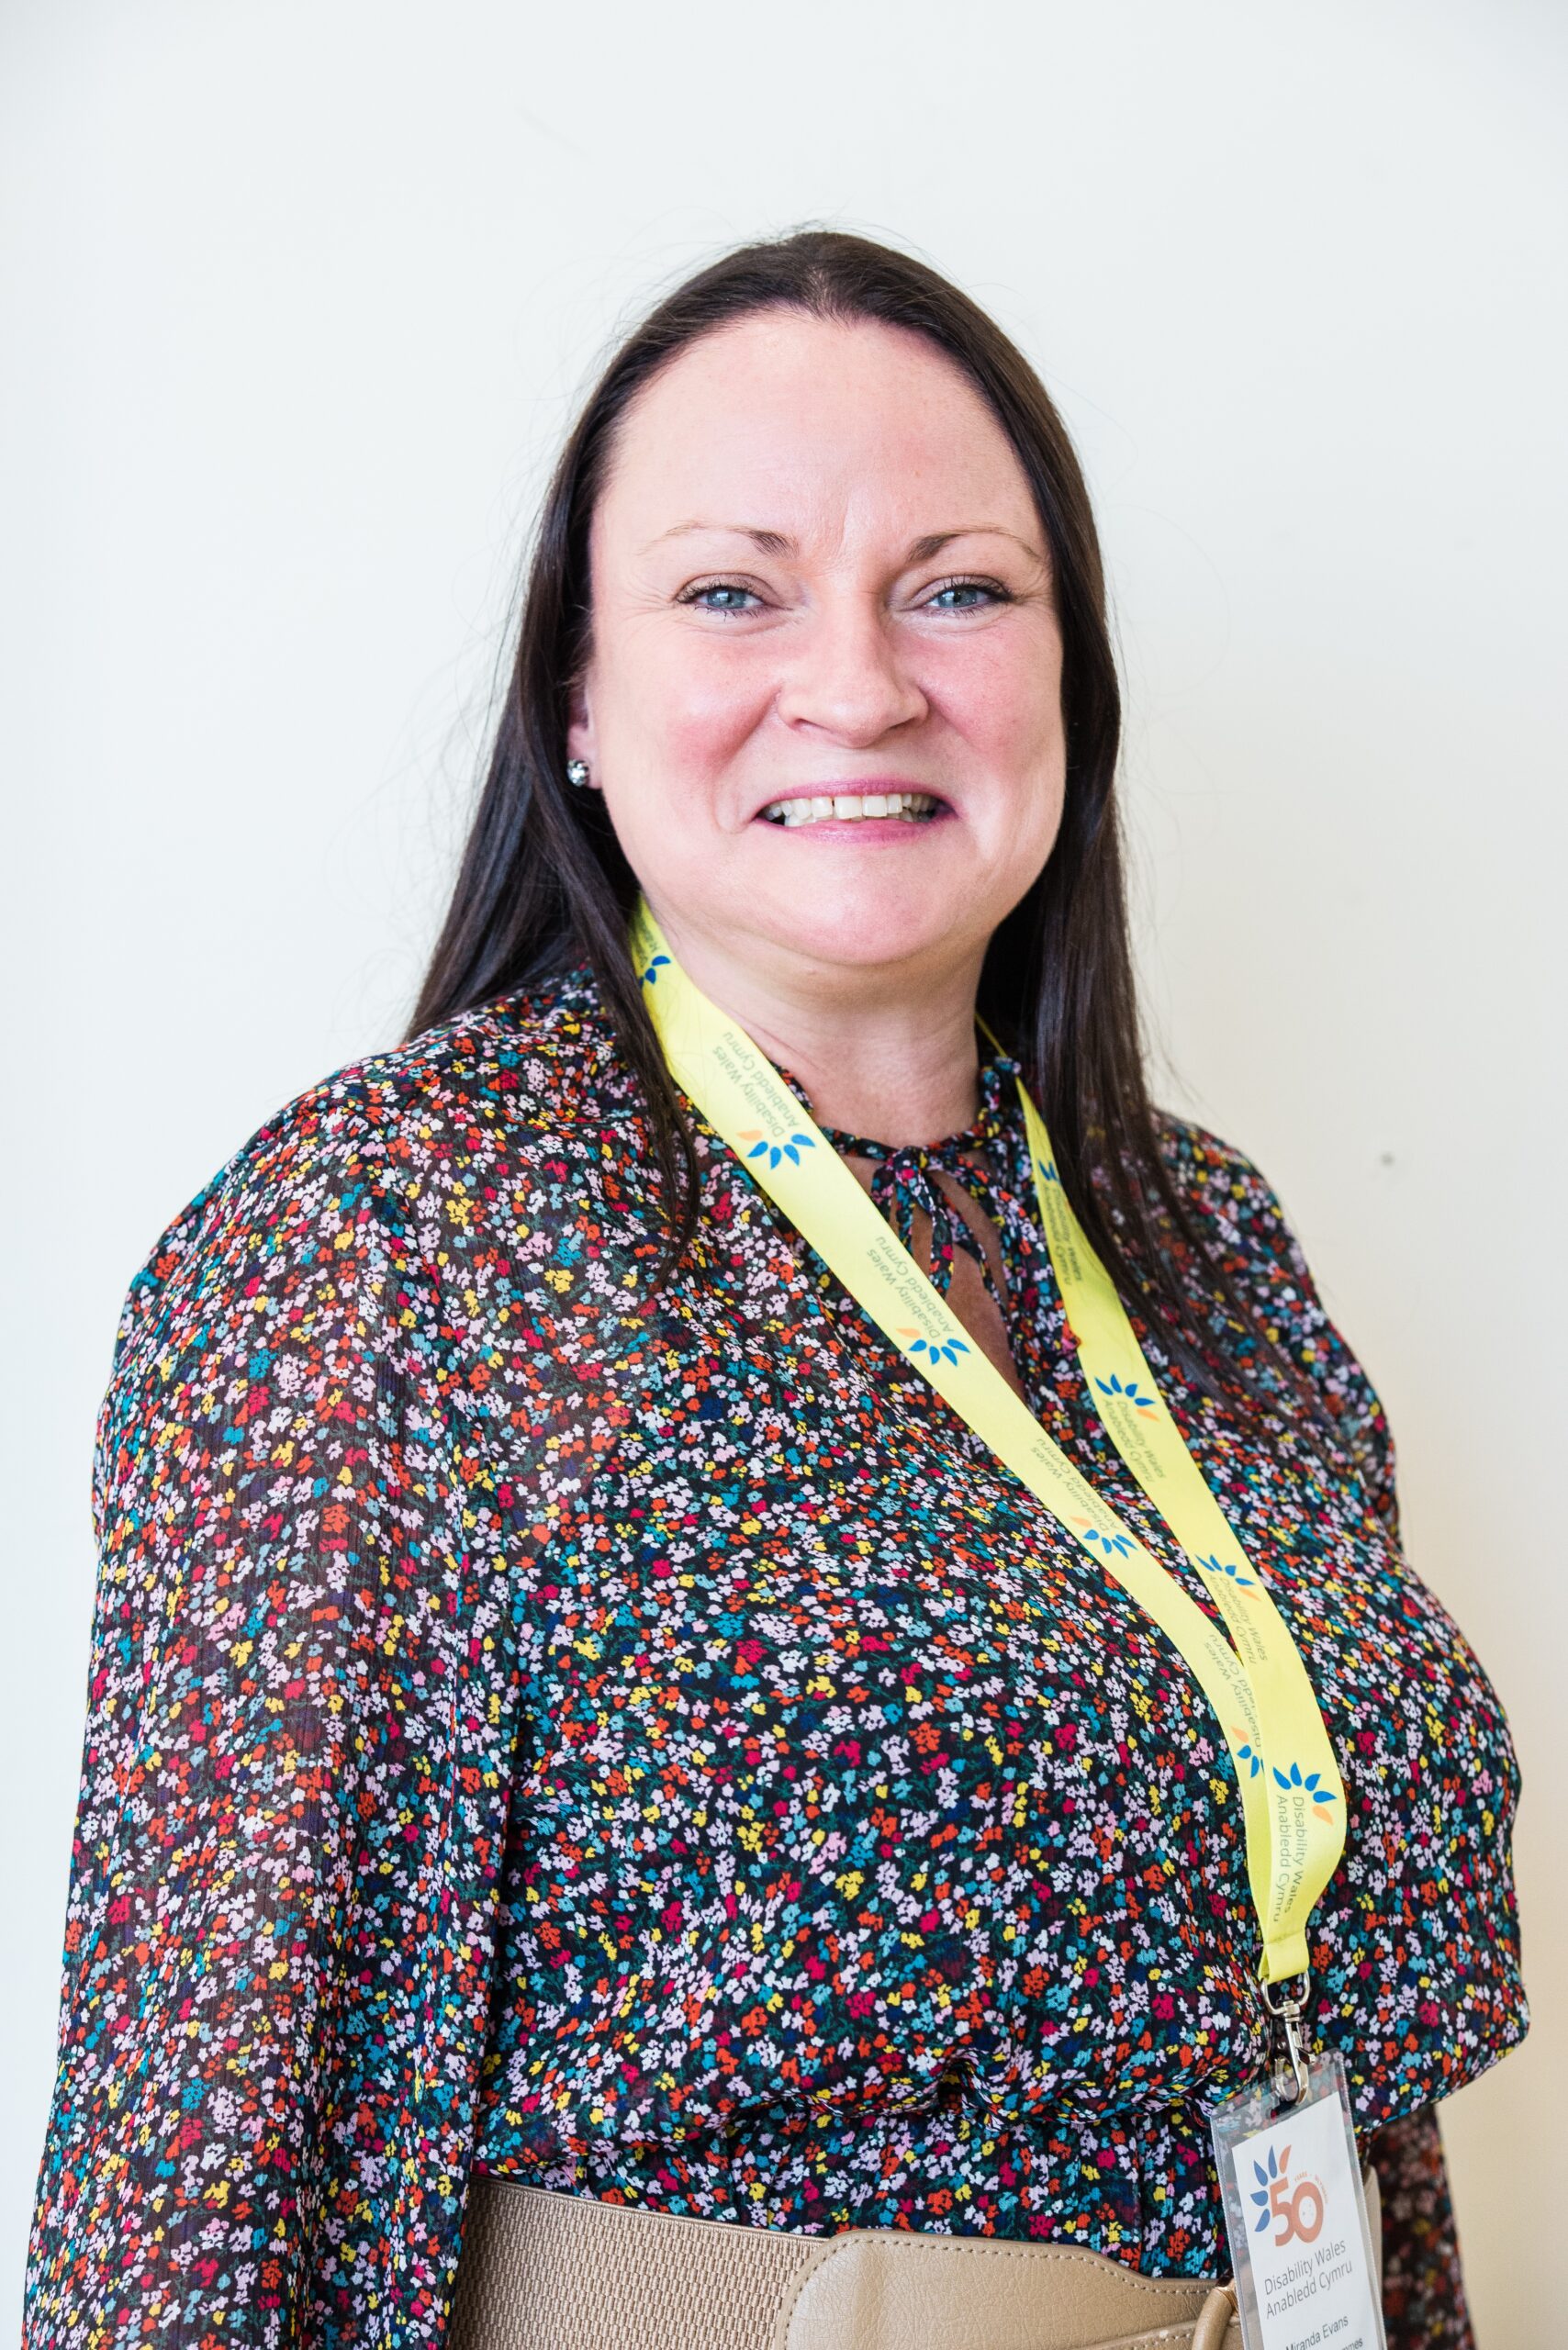 Miranda Evans standing in front of a white wall and smiling at the camera. She has long brown hair and is wearing a multicoloured patterned blouse with a DW lanyard hanging from her neck.